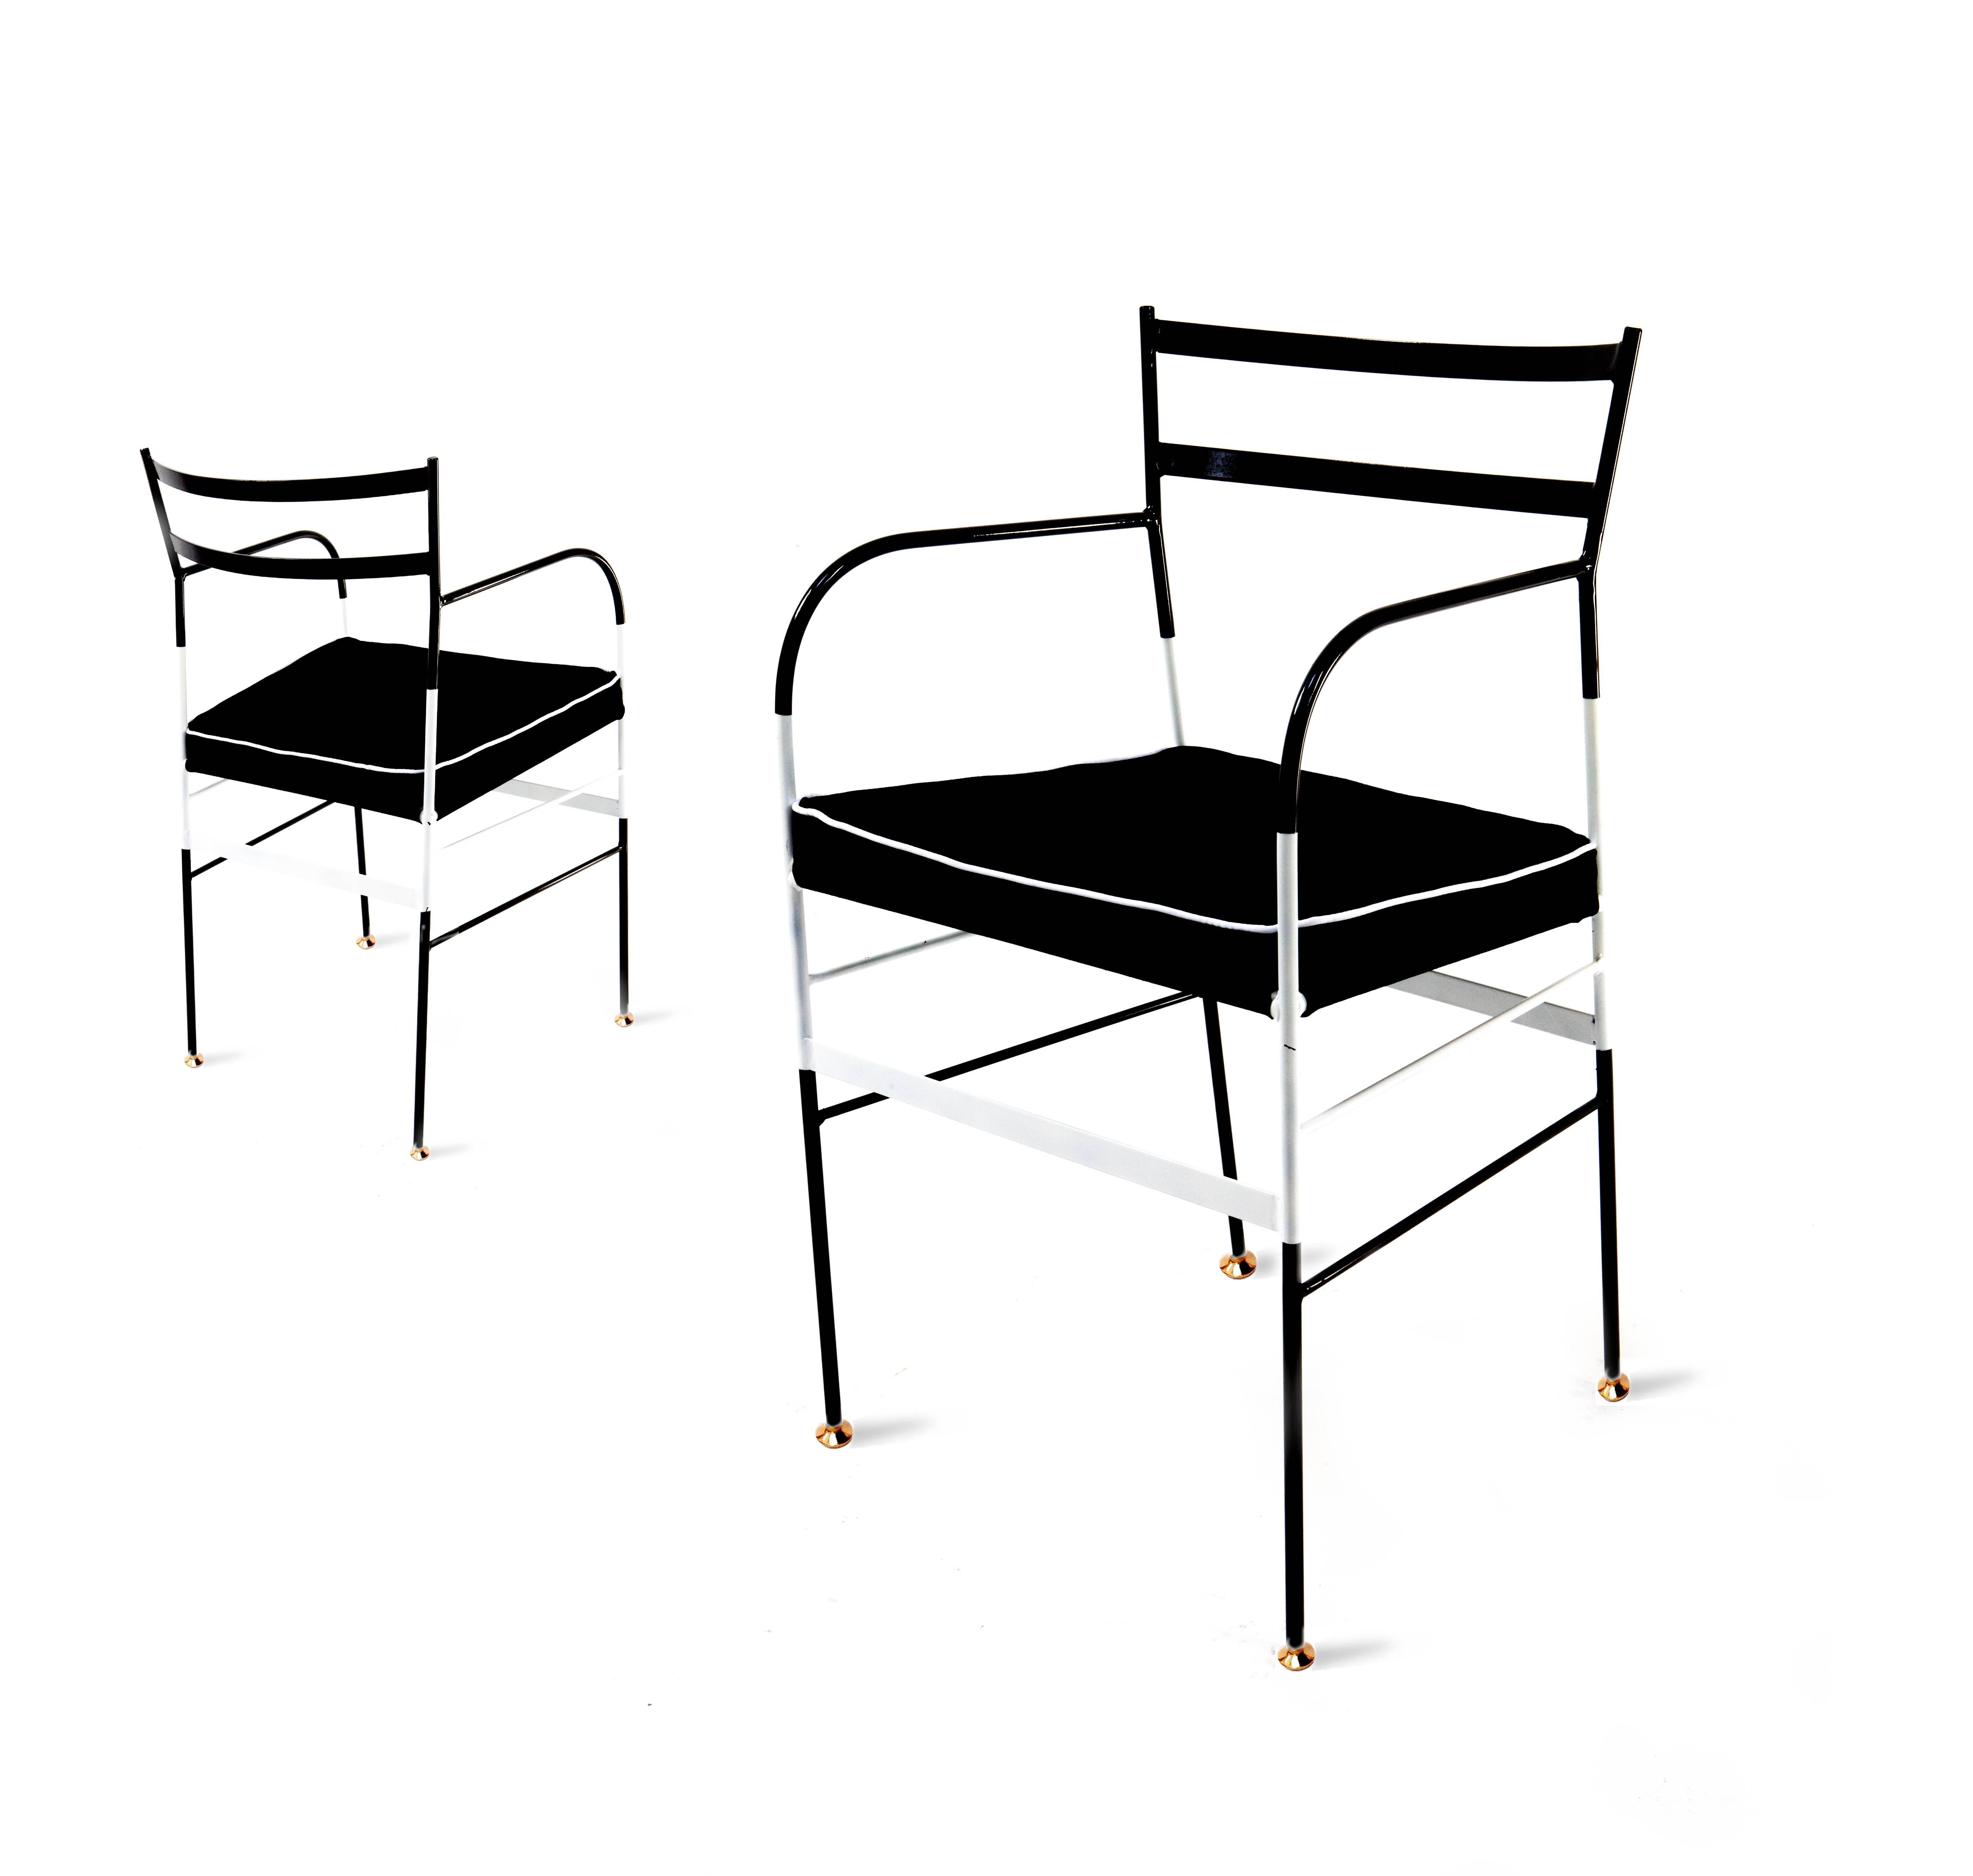 Suede piping on contrasting, finished with a uniquely organic compound paint and polish to prevent rust. Handcrafted in Italy from high-strength iron, these chairs by Sotow boast practicality and style.

Details and dimensions

Material: Iron,